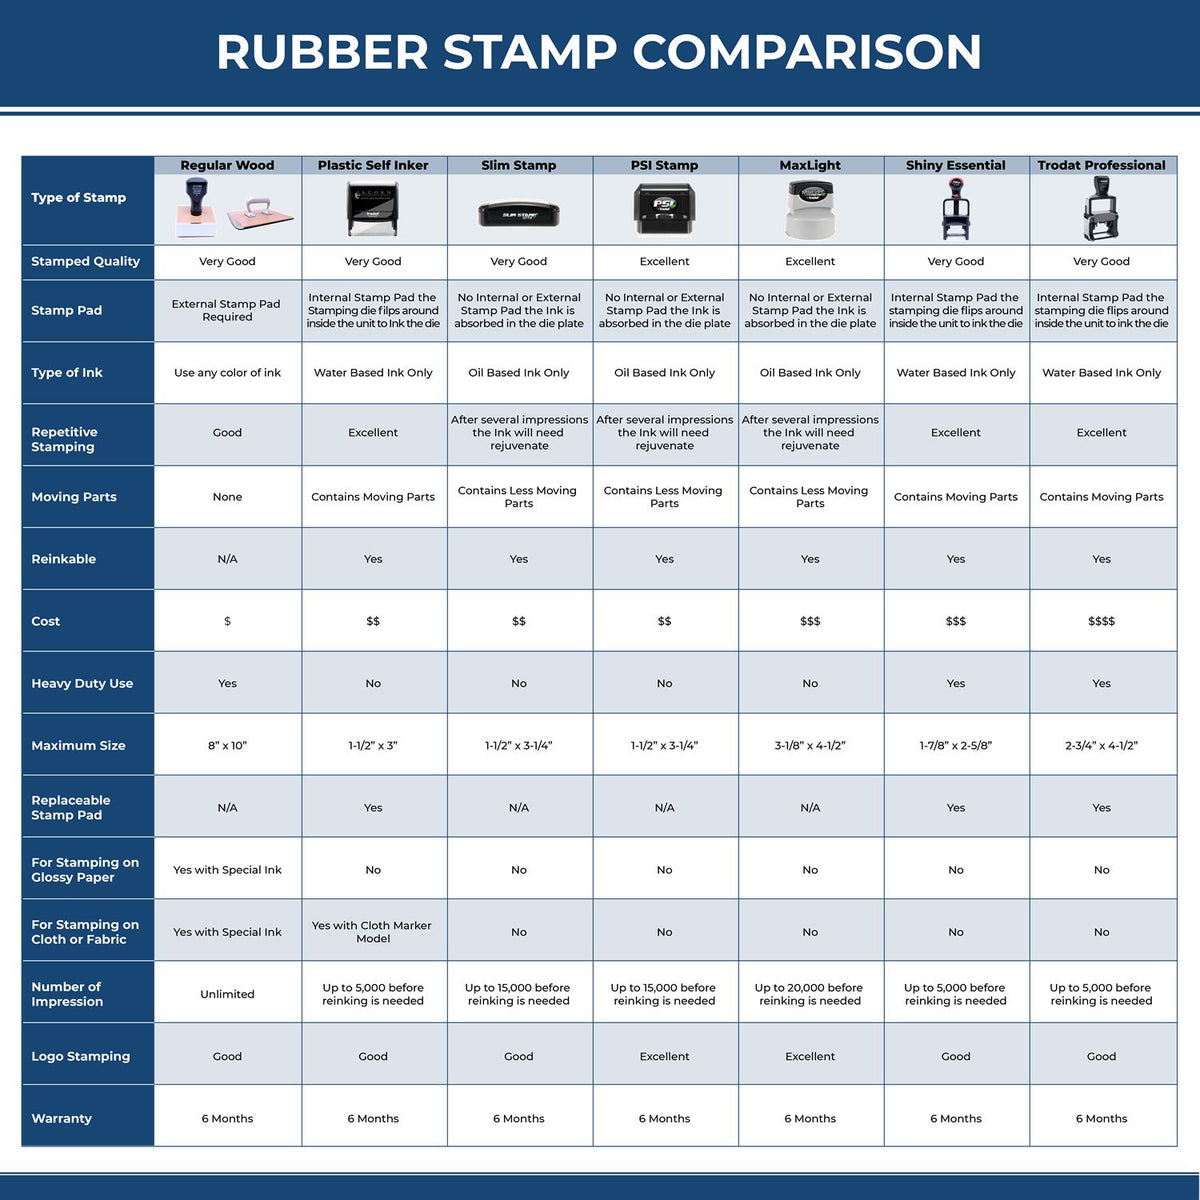 Professional Self Inking Rubber Stamp of Seal 3006 Rubber Stamp Comparison